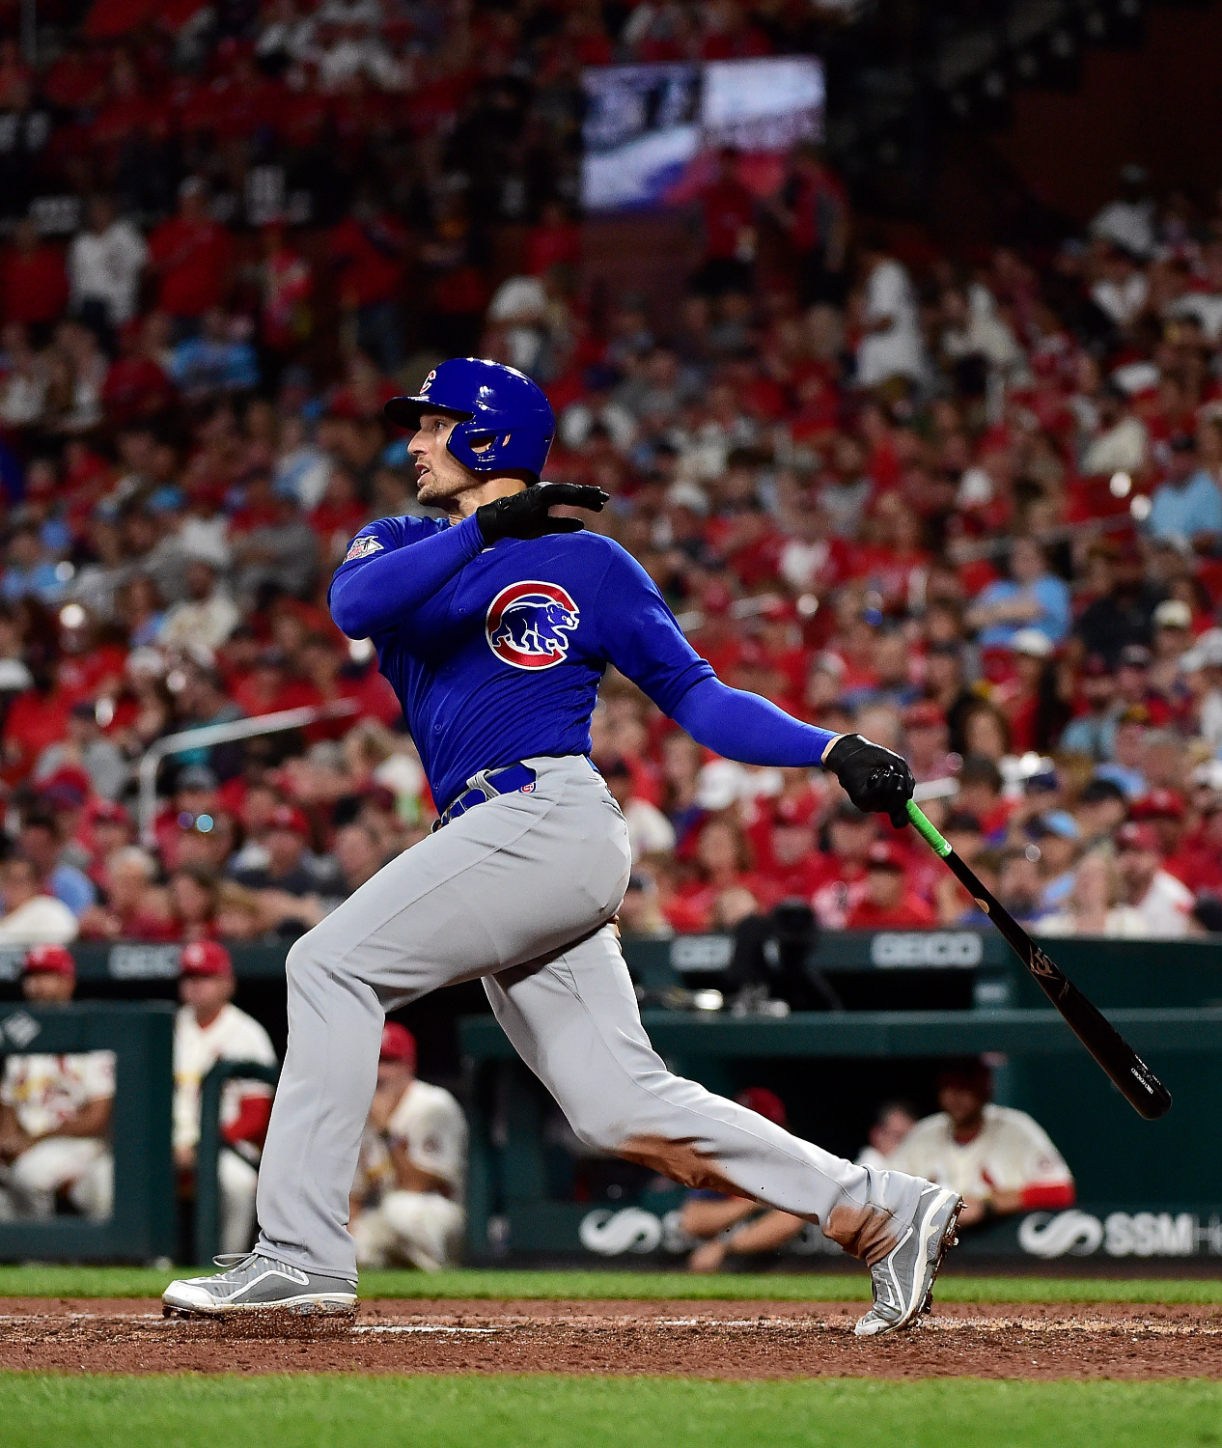 Chicago Cubs Eye Their Own Streaming Service The National Interest